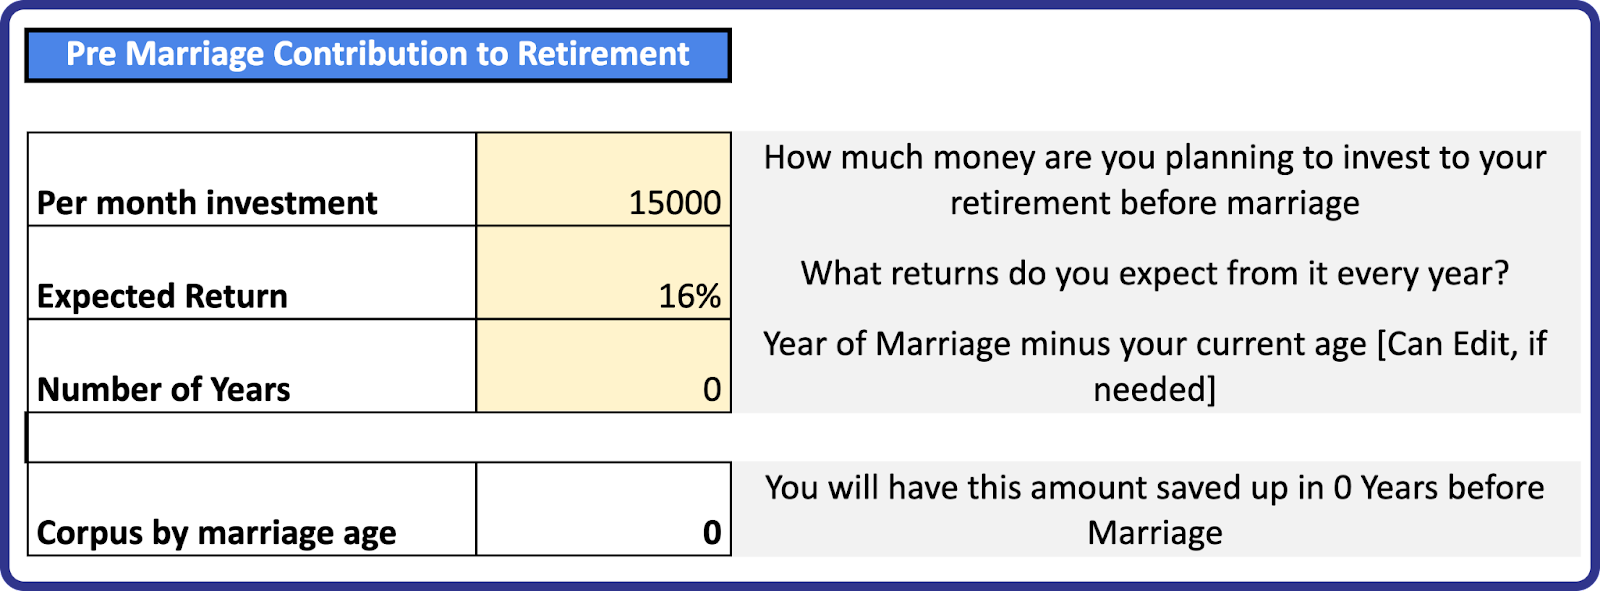 invest money pre-marriage contribution to retirement | marketfeed